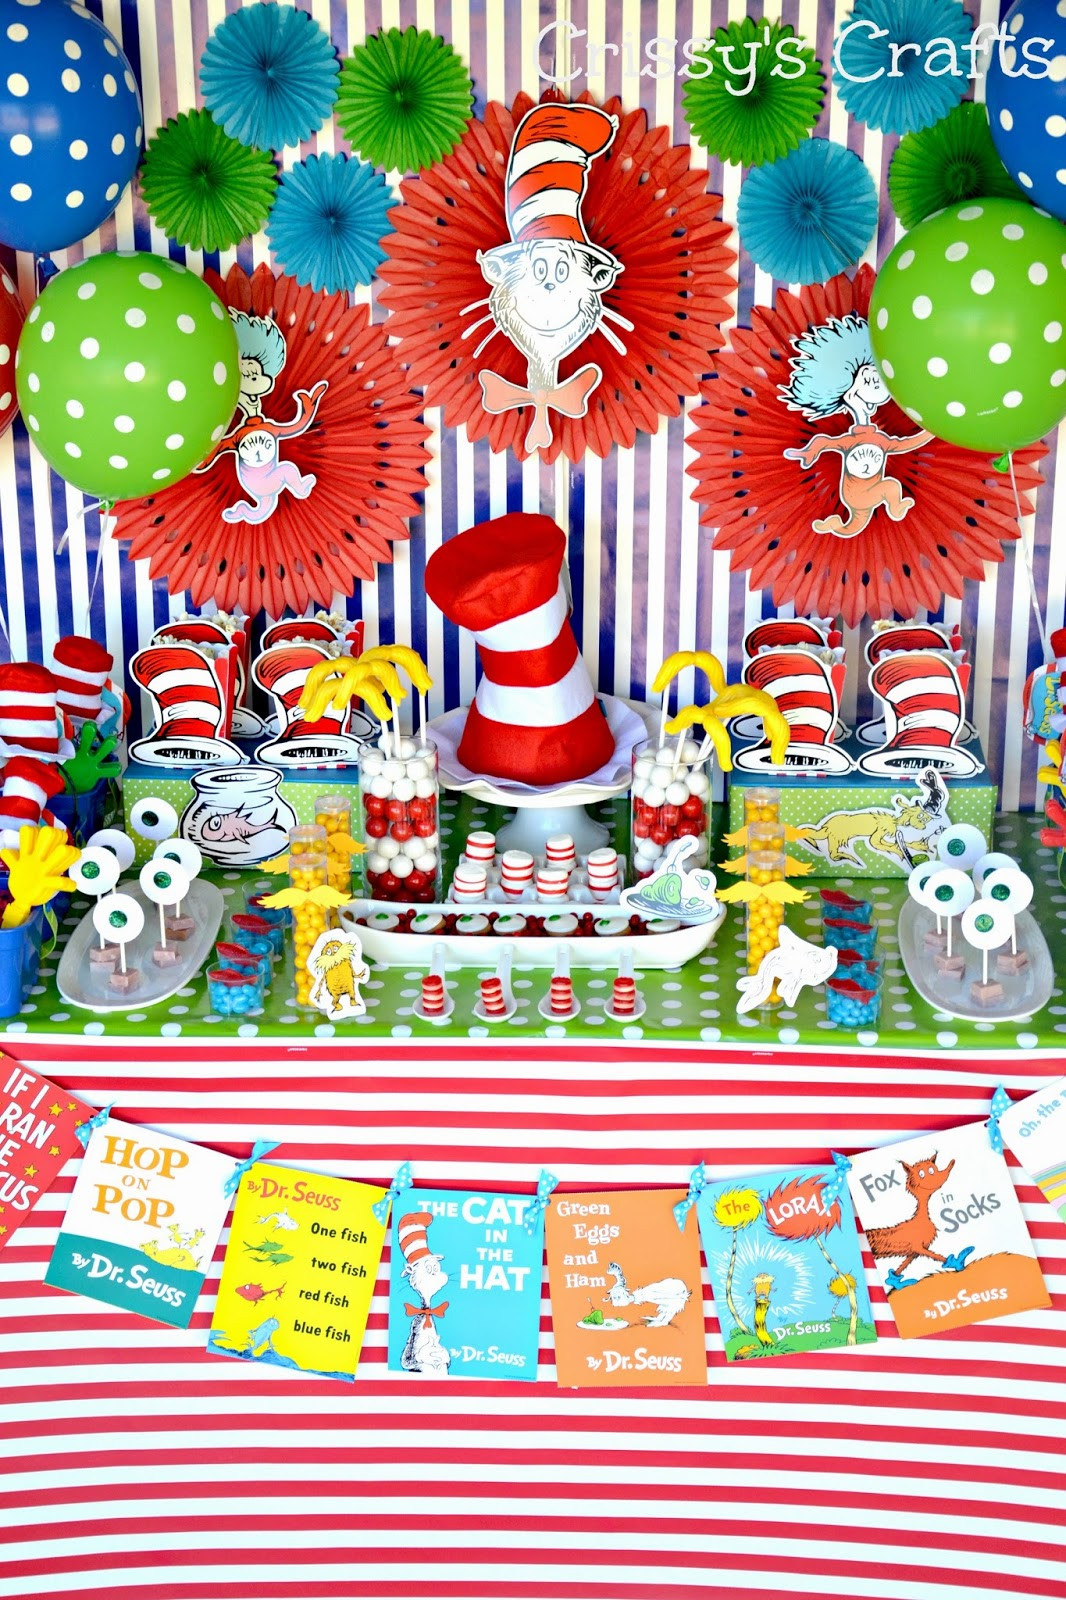 Dr Seuss Birthday Decoration Ideas
 Crissy s Crafts Dr Seuss Party Ideas and Snacks